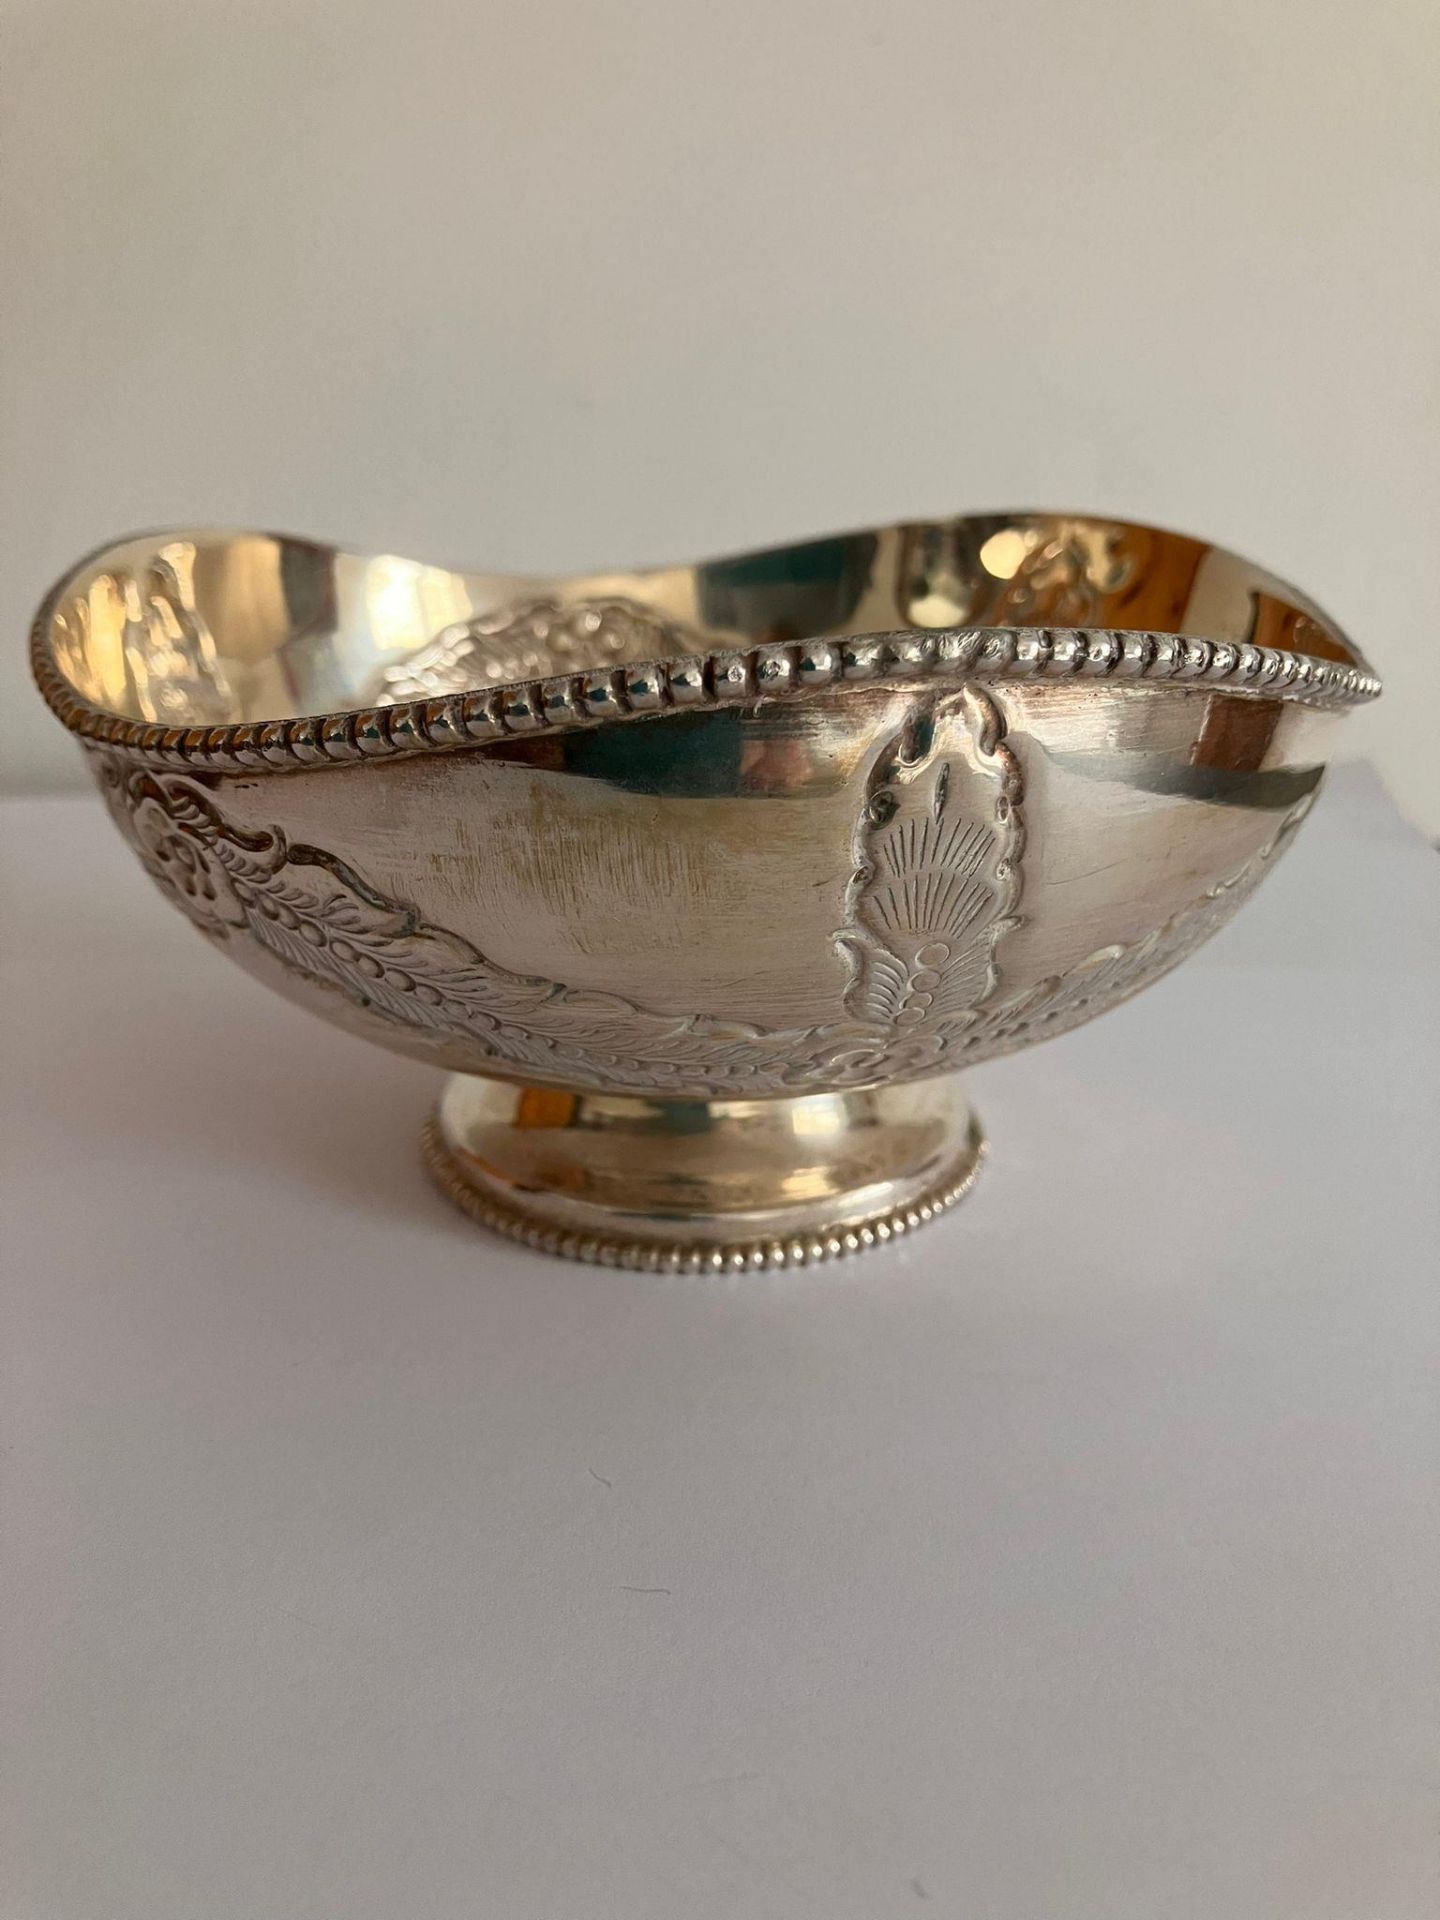 Middle Eastern SILVER BONBON DISH. Beautifully decorated. 138 grams.